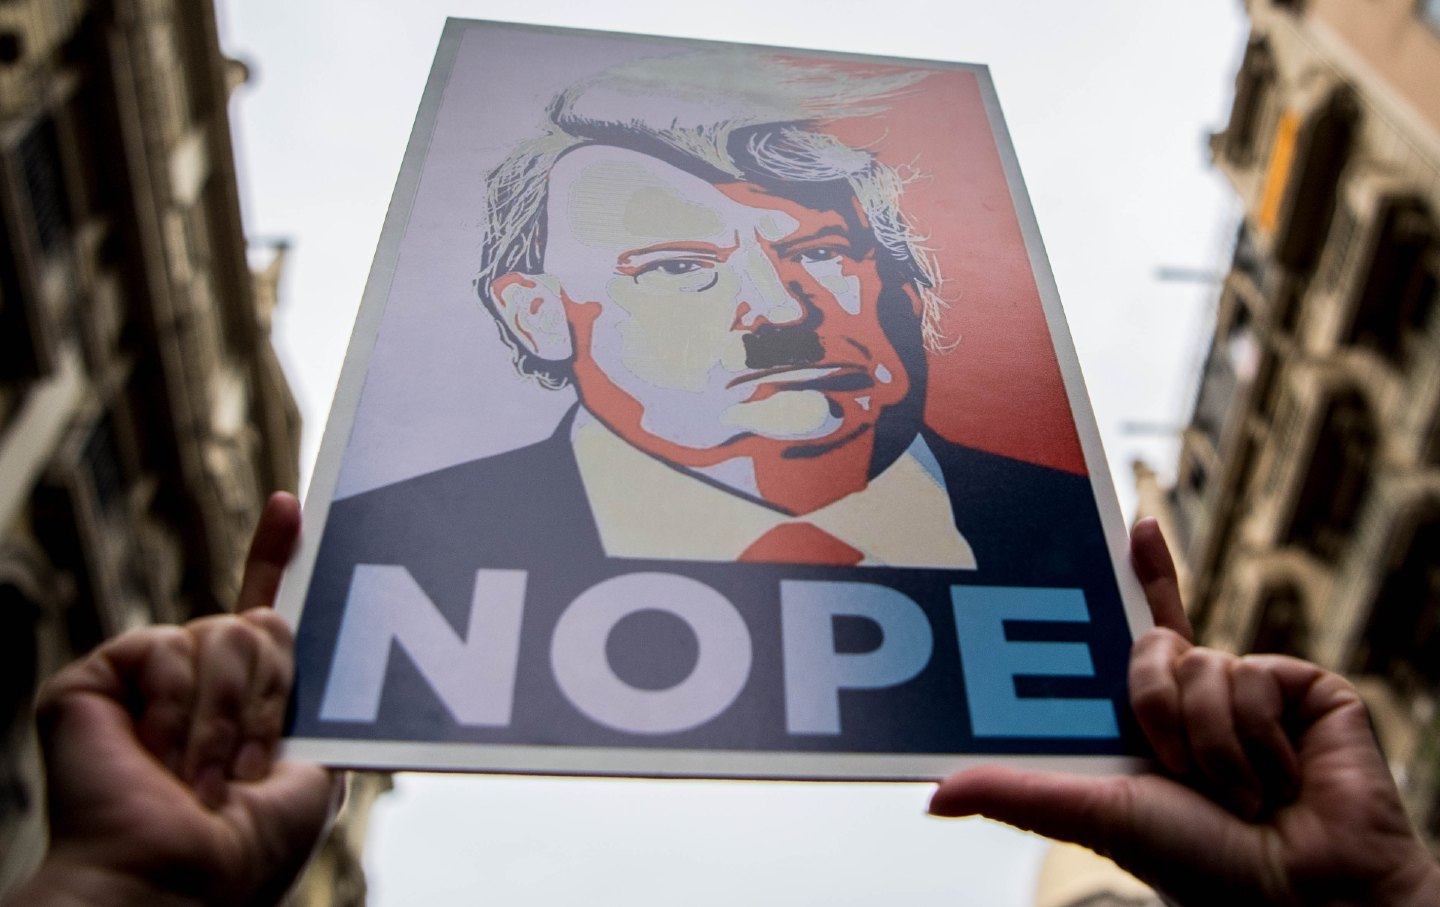 Poster of Trump at a women's march rally that says 